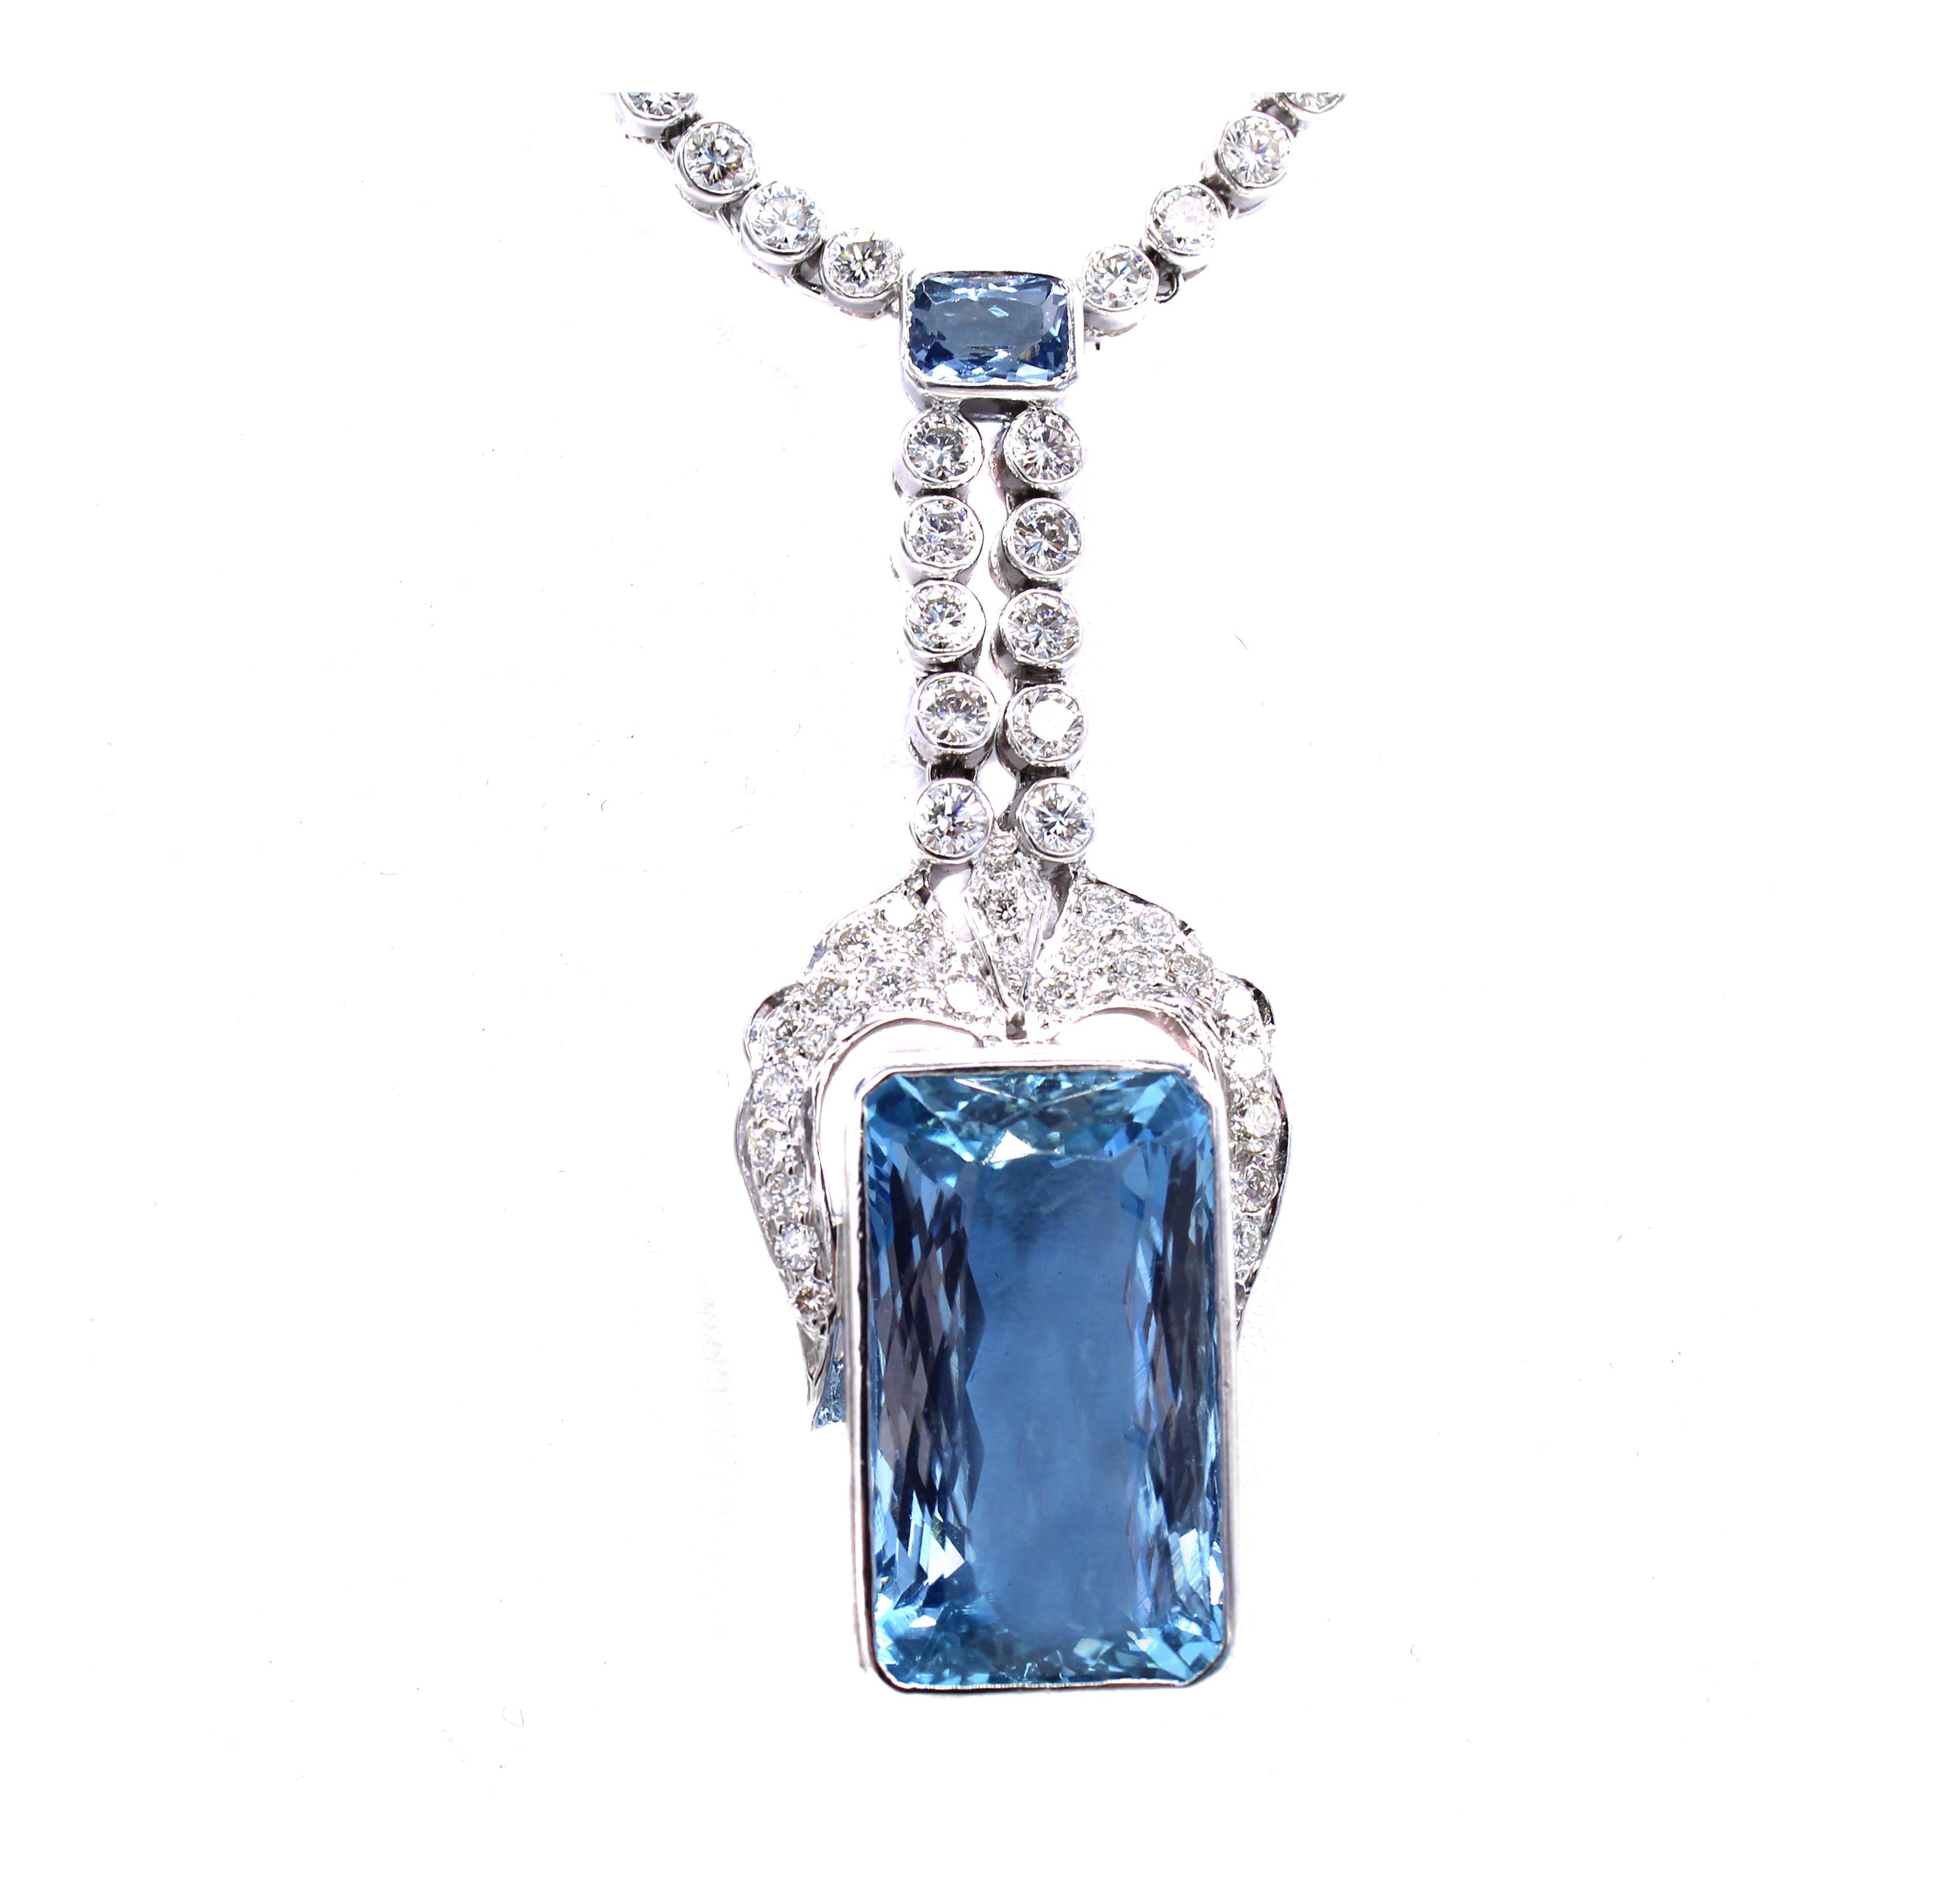 Beautifully designed and masterfully hand-crafted this chic 1960s necklace features intense sky-blue aquamarines and bright white round brilliant cut diamonds. The largest of the aquamarines is bezel set in the flexible pendant element at the base